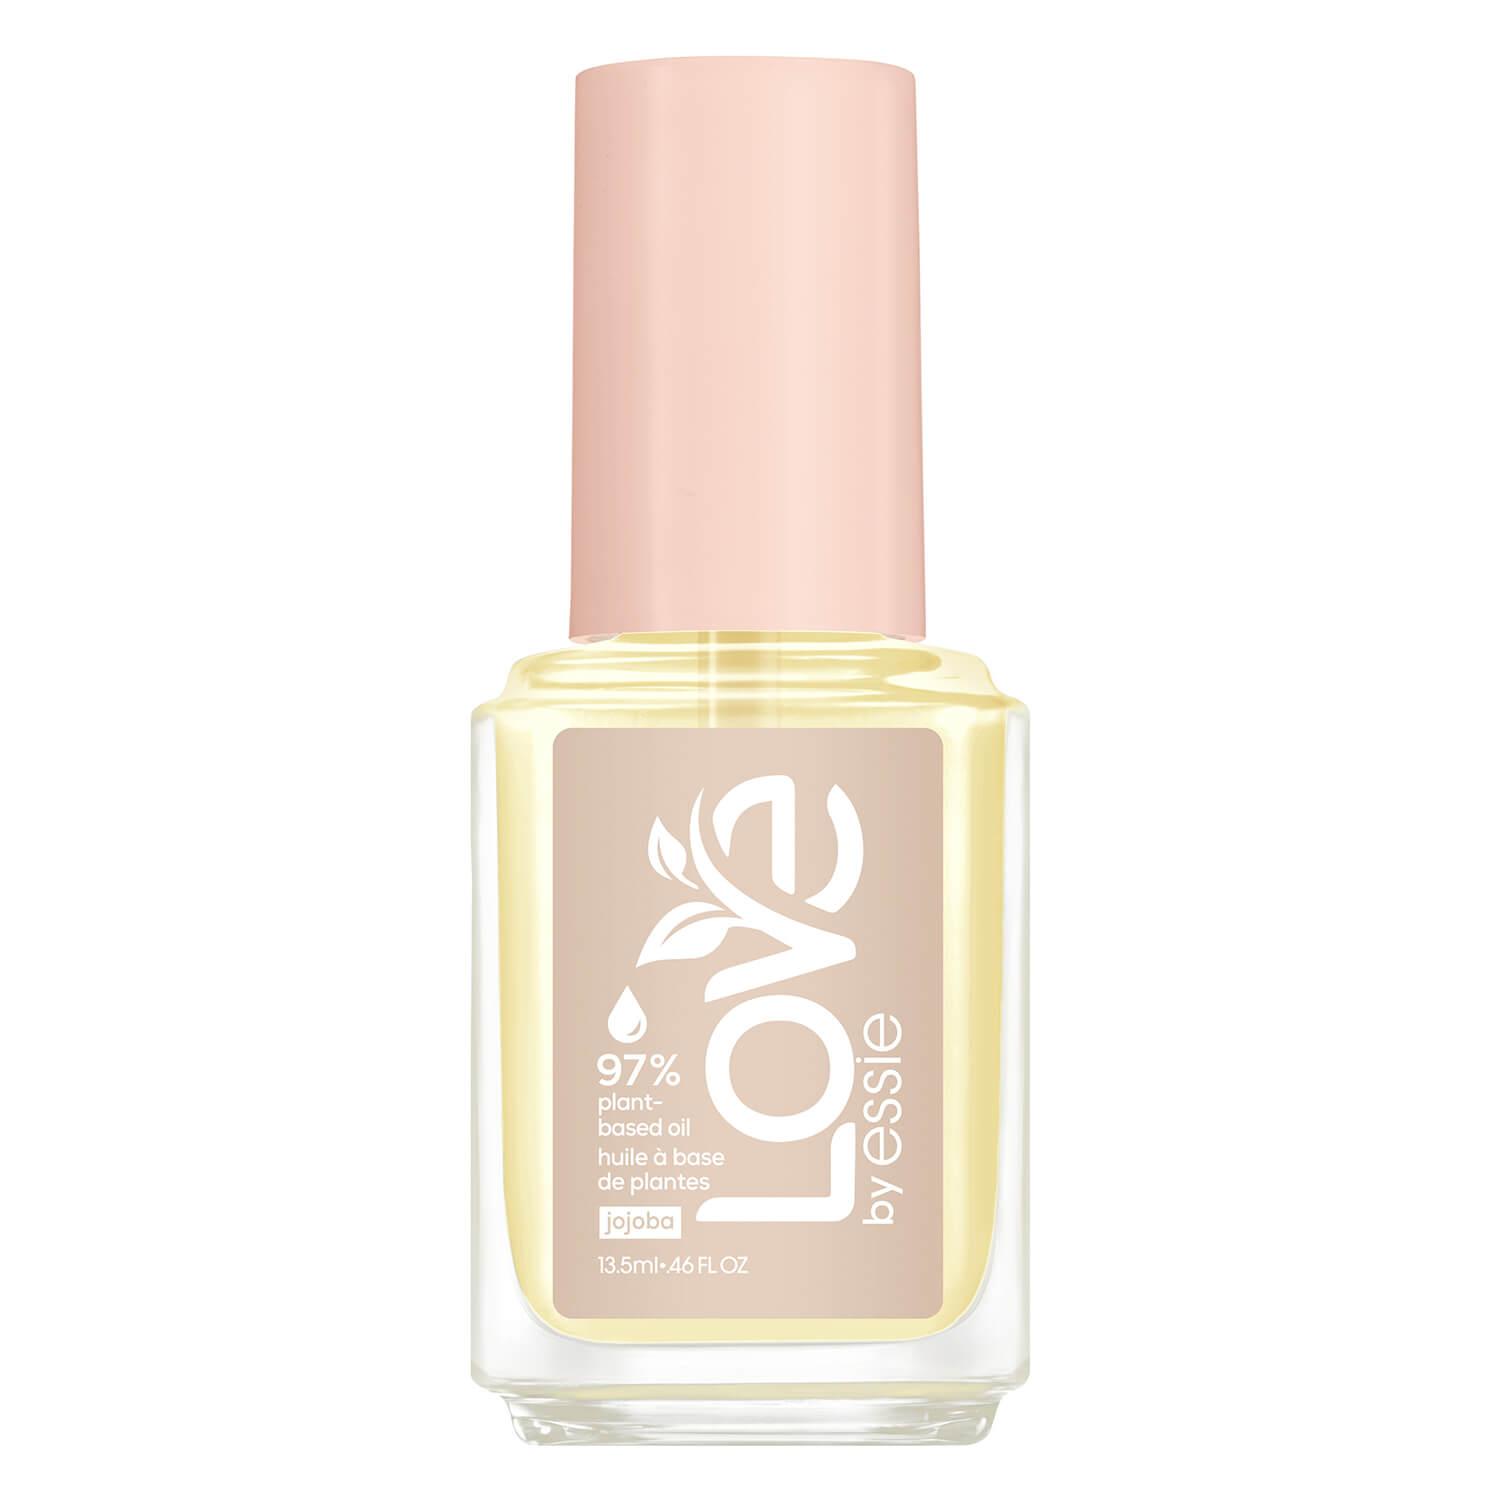 Love by essie - Concentrated Jojoba Nail & Cuticle Oil